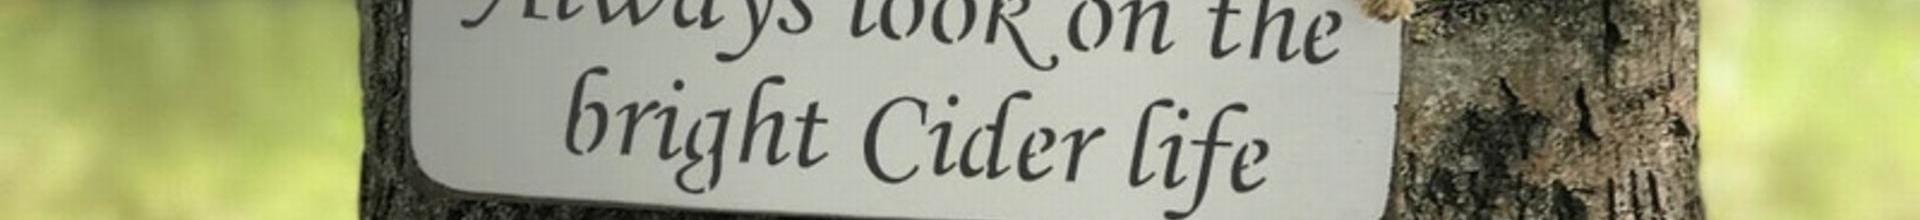 Always Look On The Bright Cider Life Wooden Sign